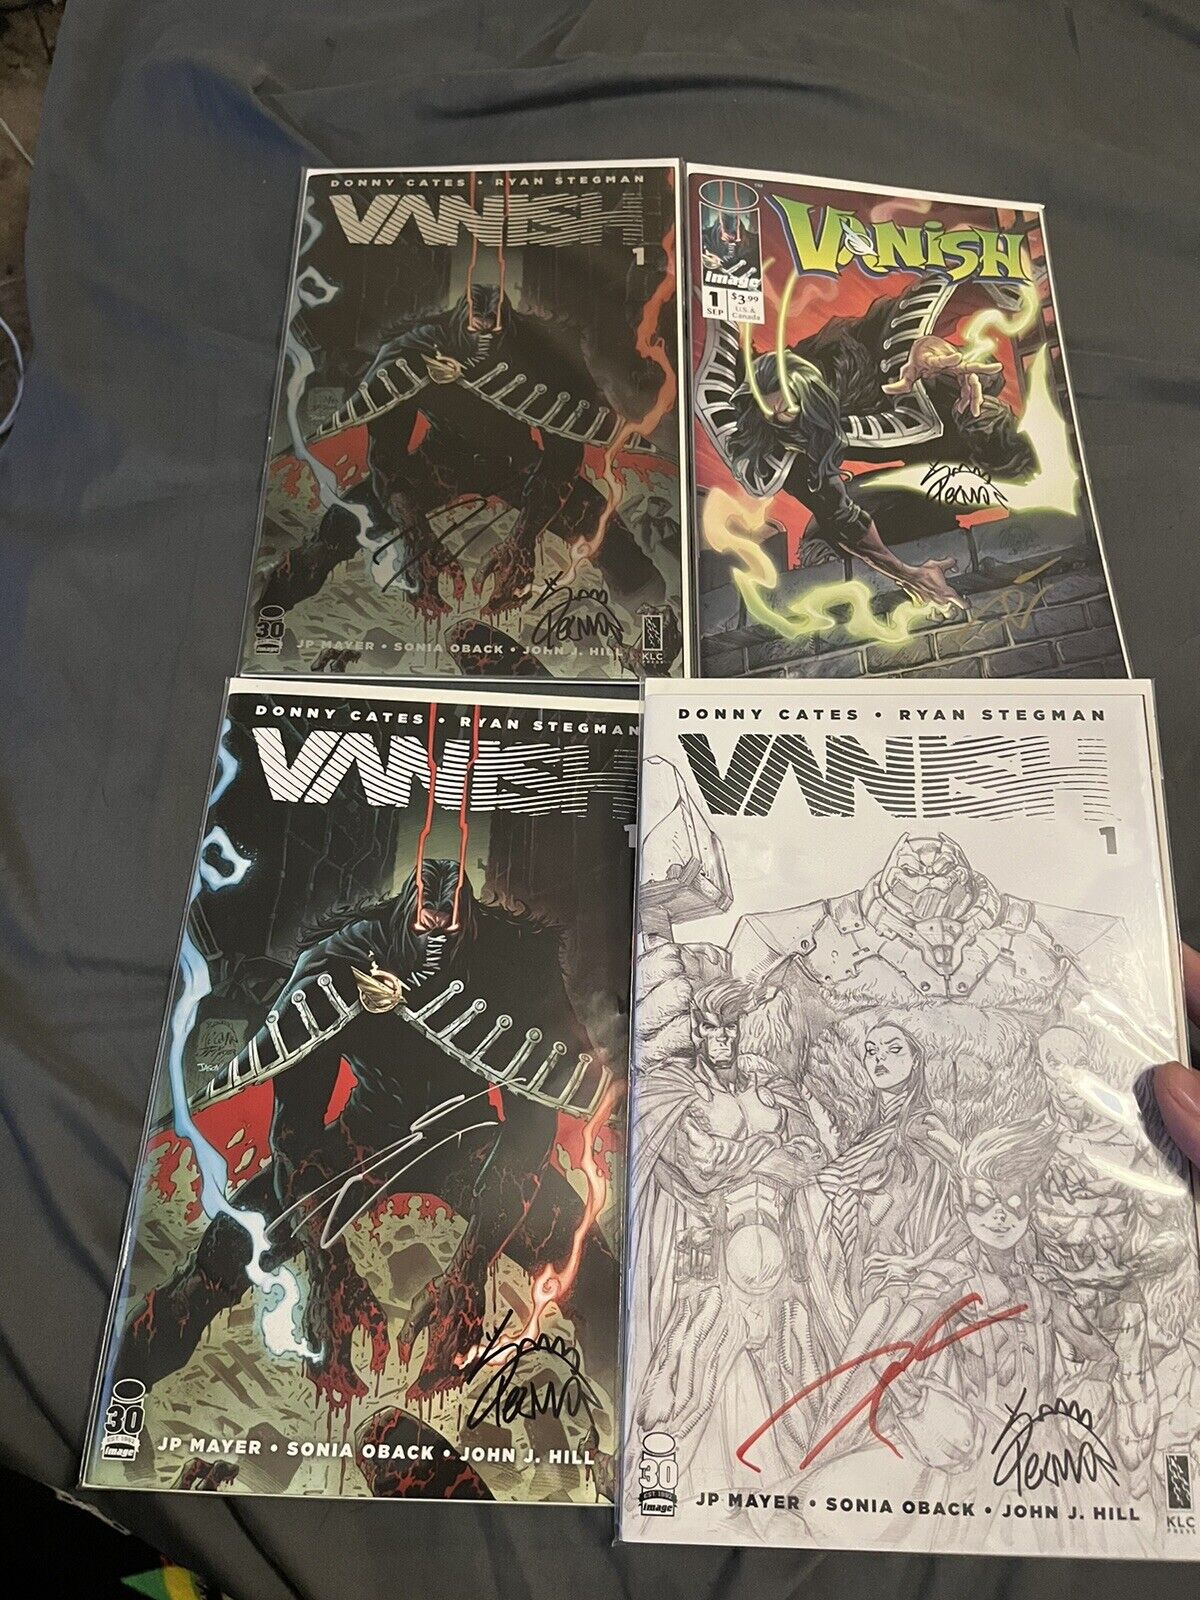 VANISH #1 Signed By Ryan Stegman And Donny Cates Set Of 4 Substack Exclusive NM